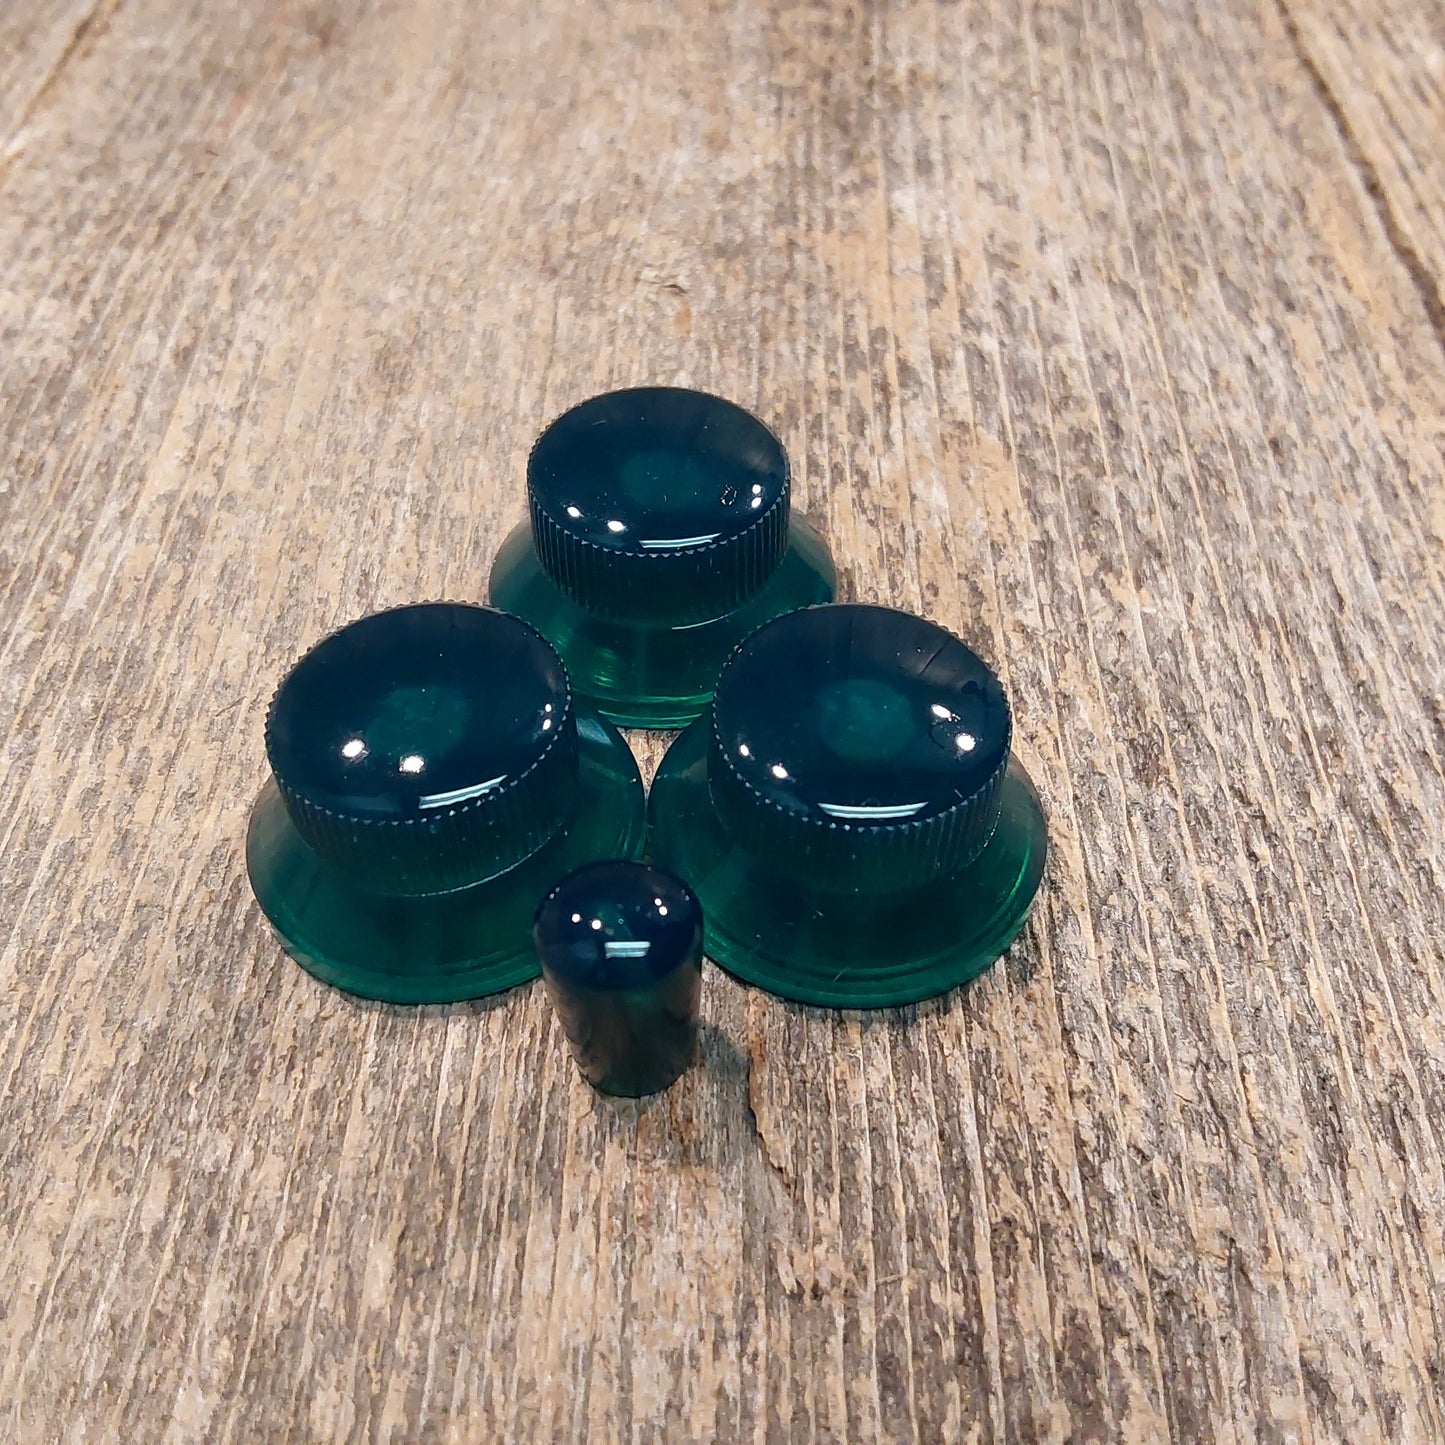 Knobhead PDX - Uji Green Bell knobs Set of 3 w/ Blade Switch tip